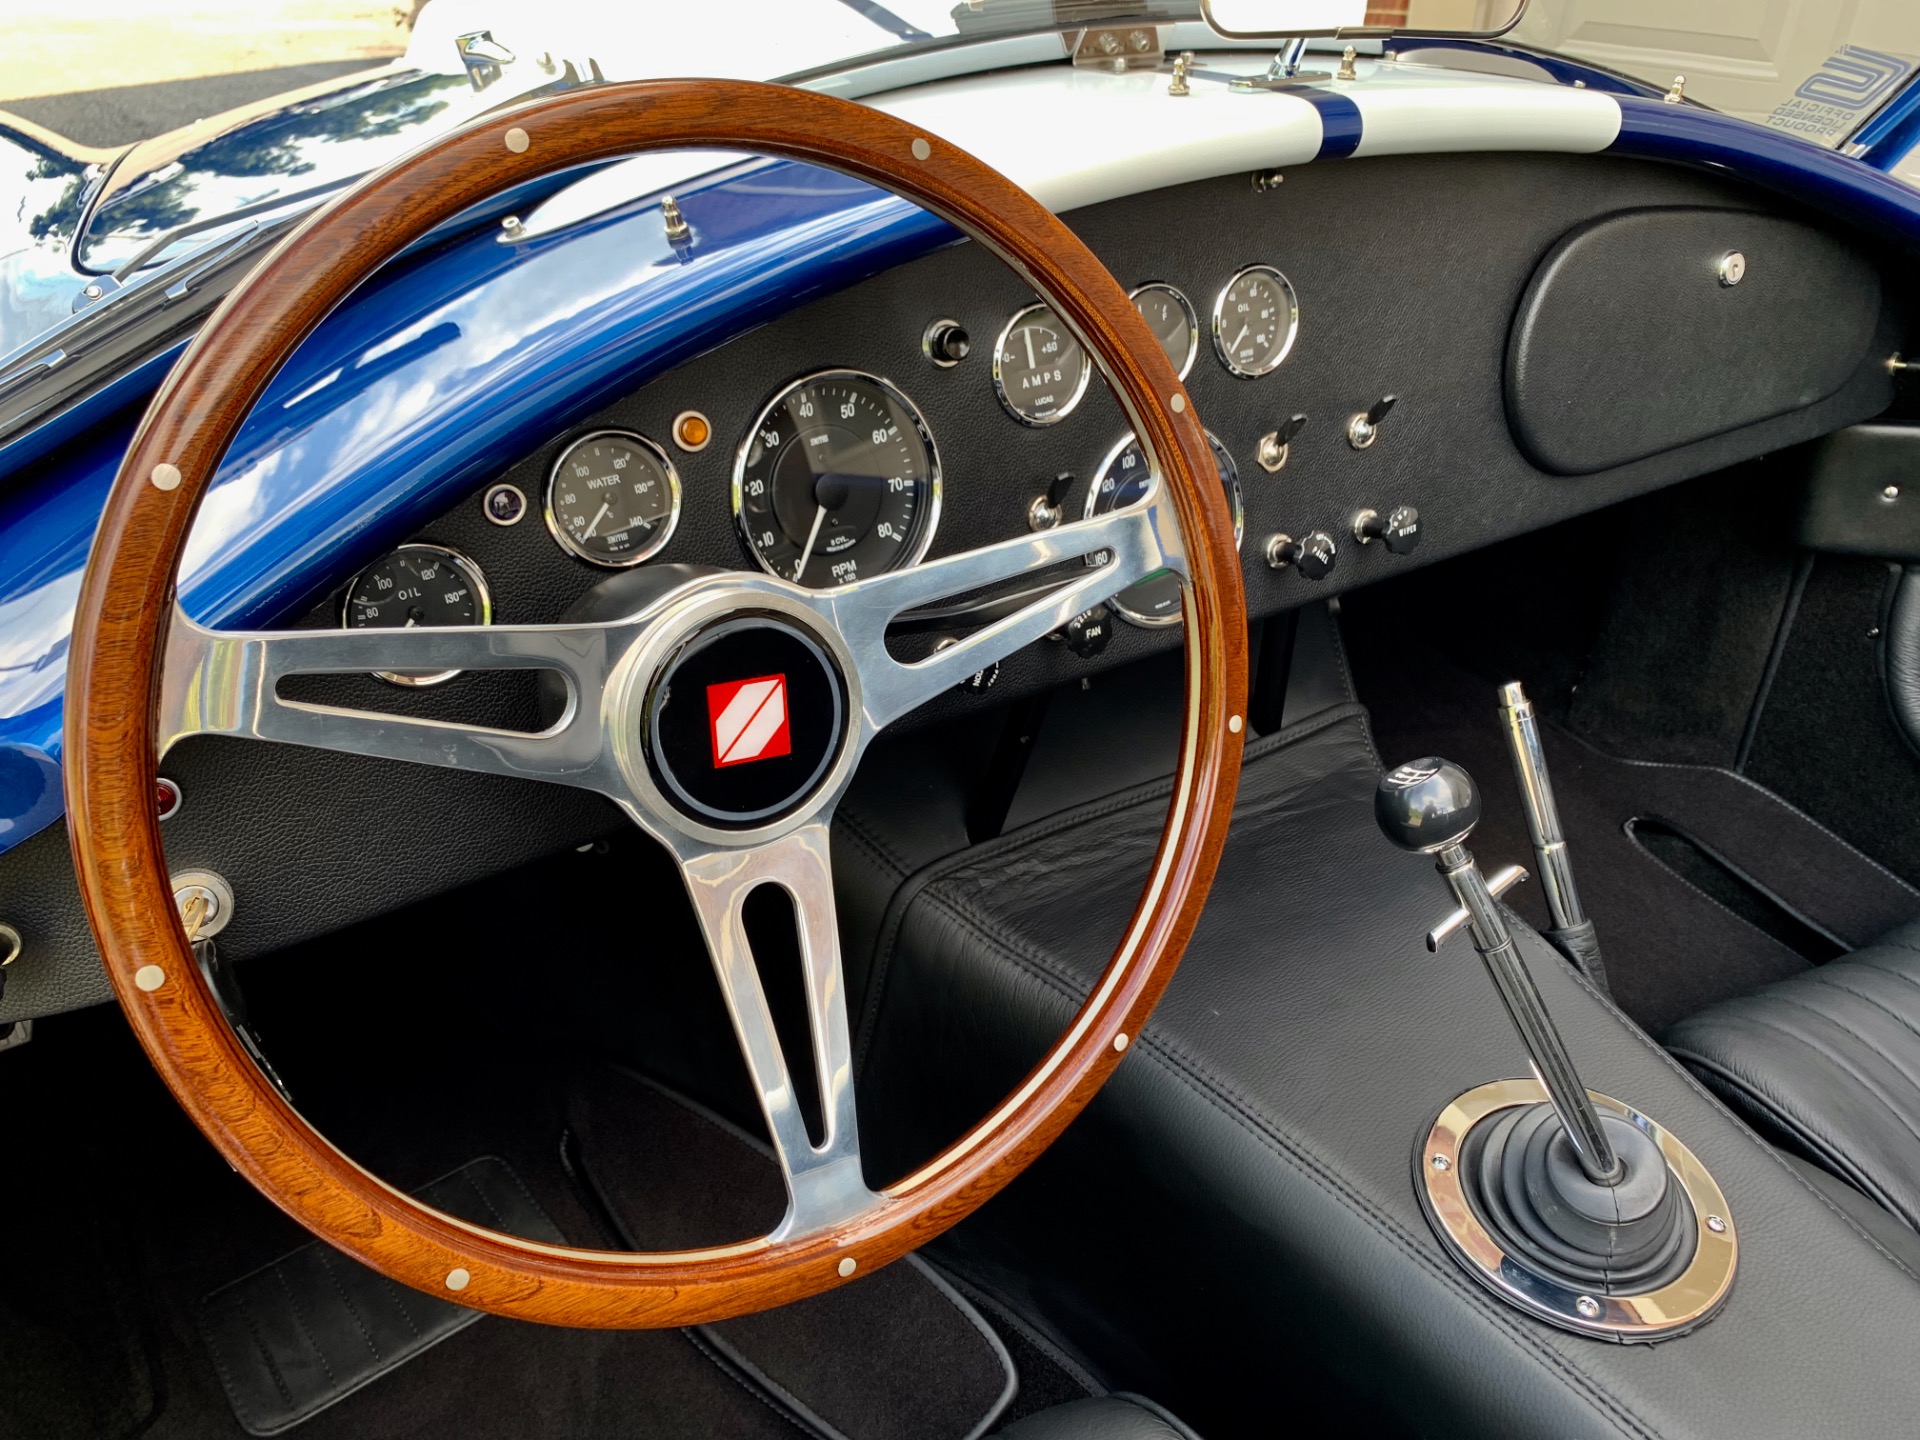 New-1965-Superformance-MKIII-Cobra-427-Now-Available